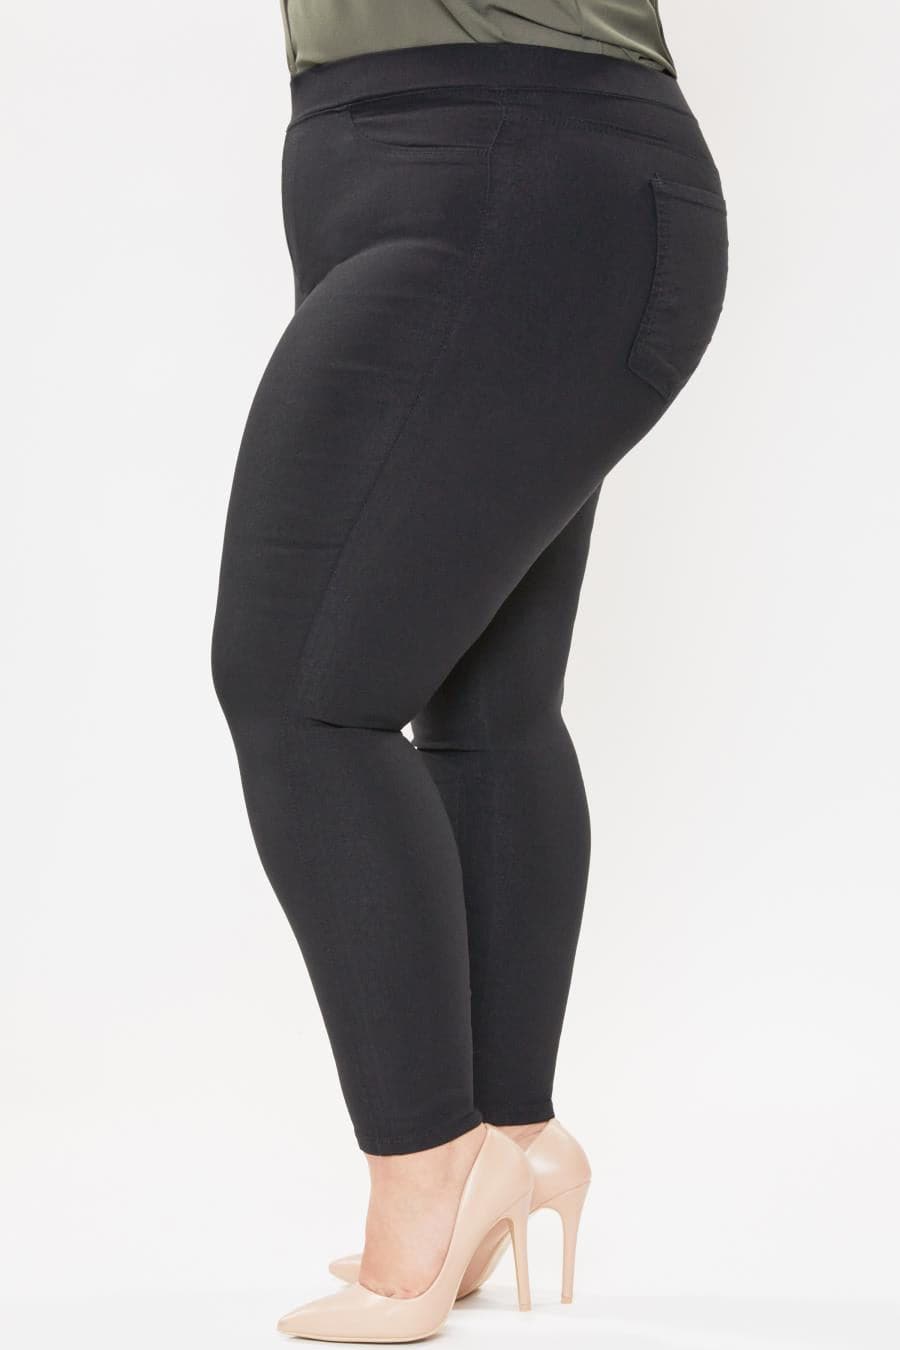 Women's Plus Size Mid Rise Jeggings from ROYALTY – Royalty For me